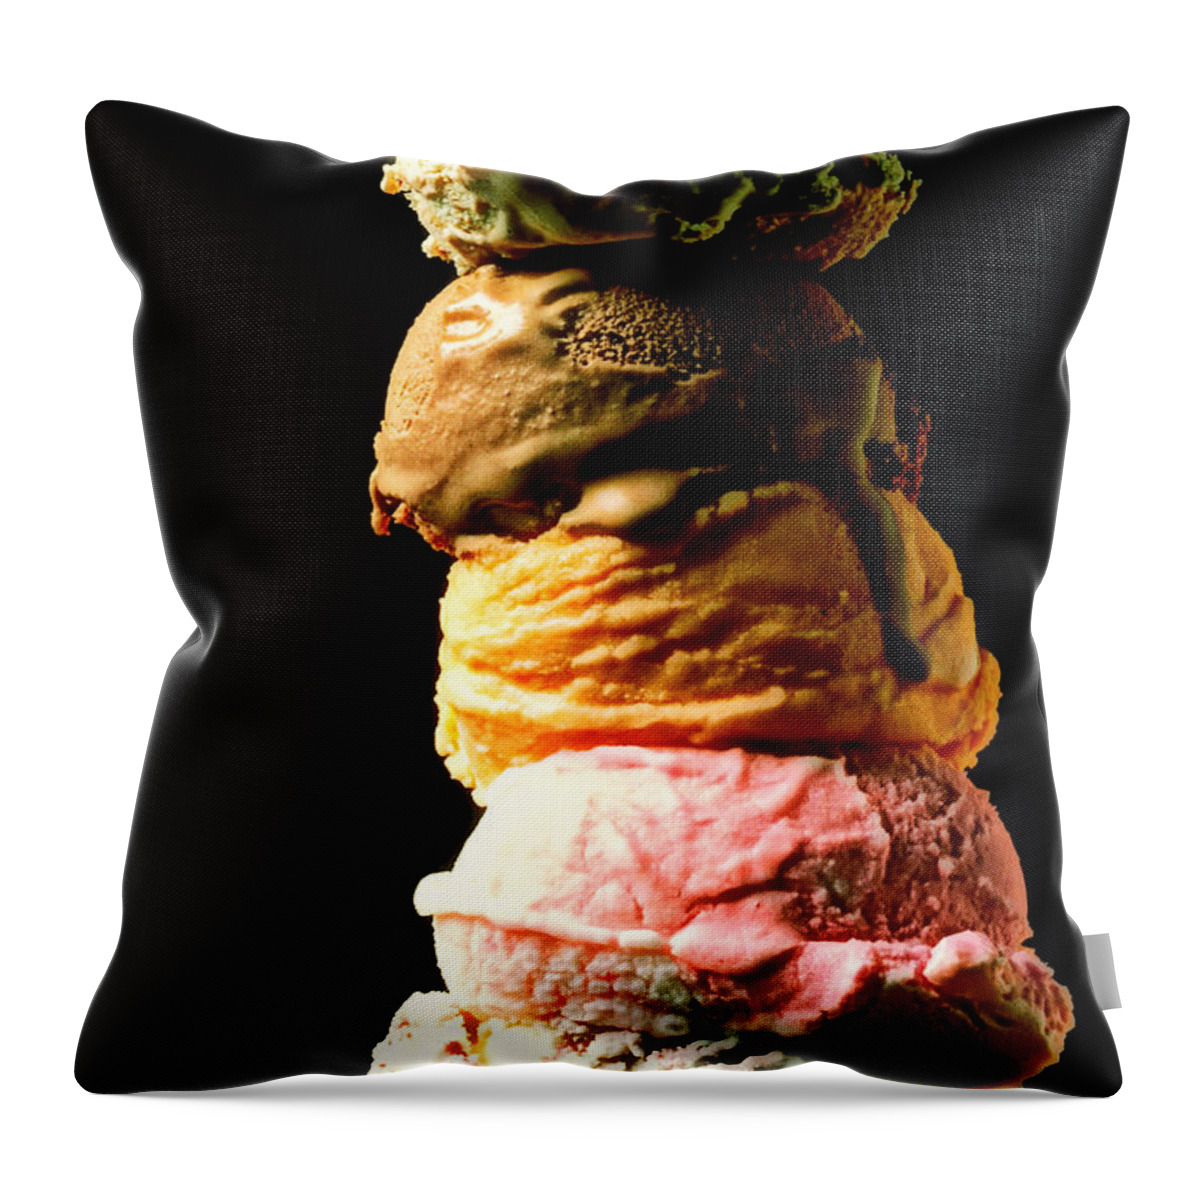 Five Scoops Throw Pillow featuring the photograph Five Scoops of Ice Cream by Garry Gay